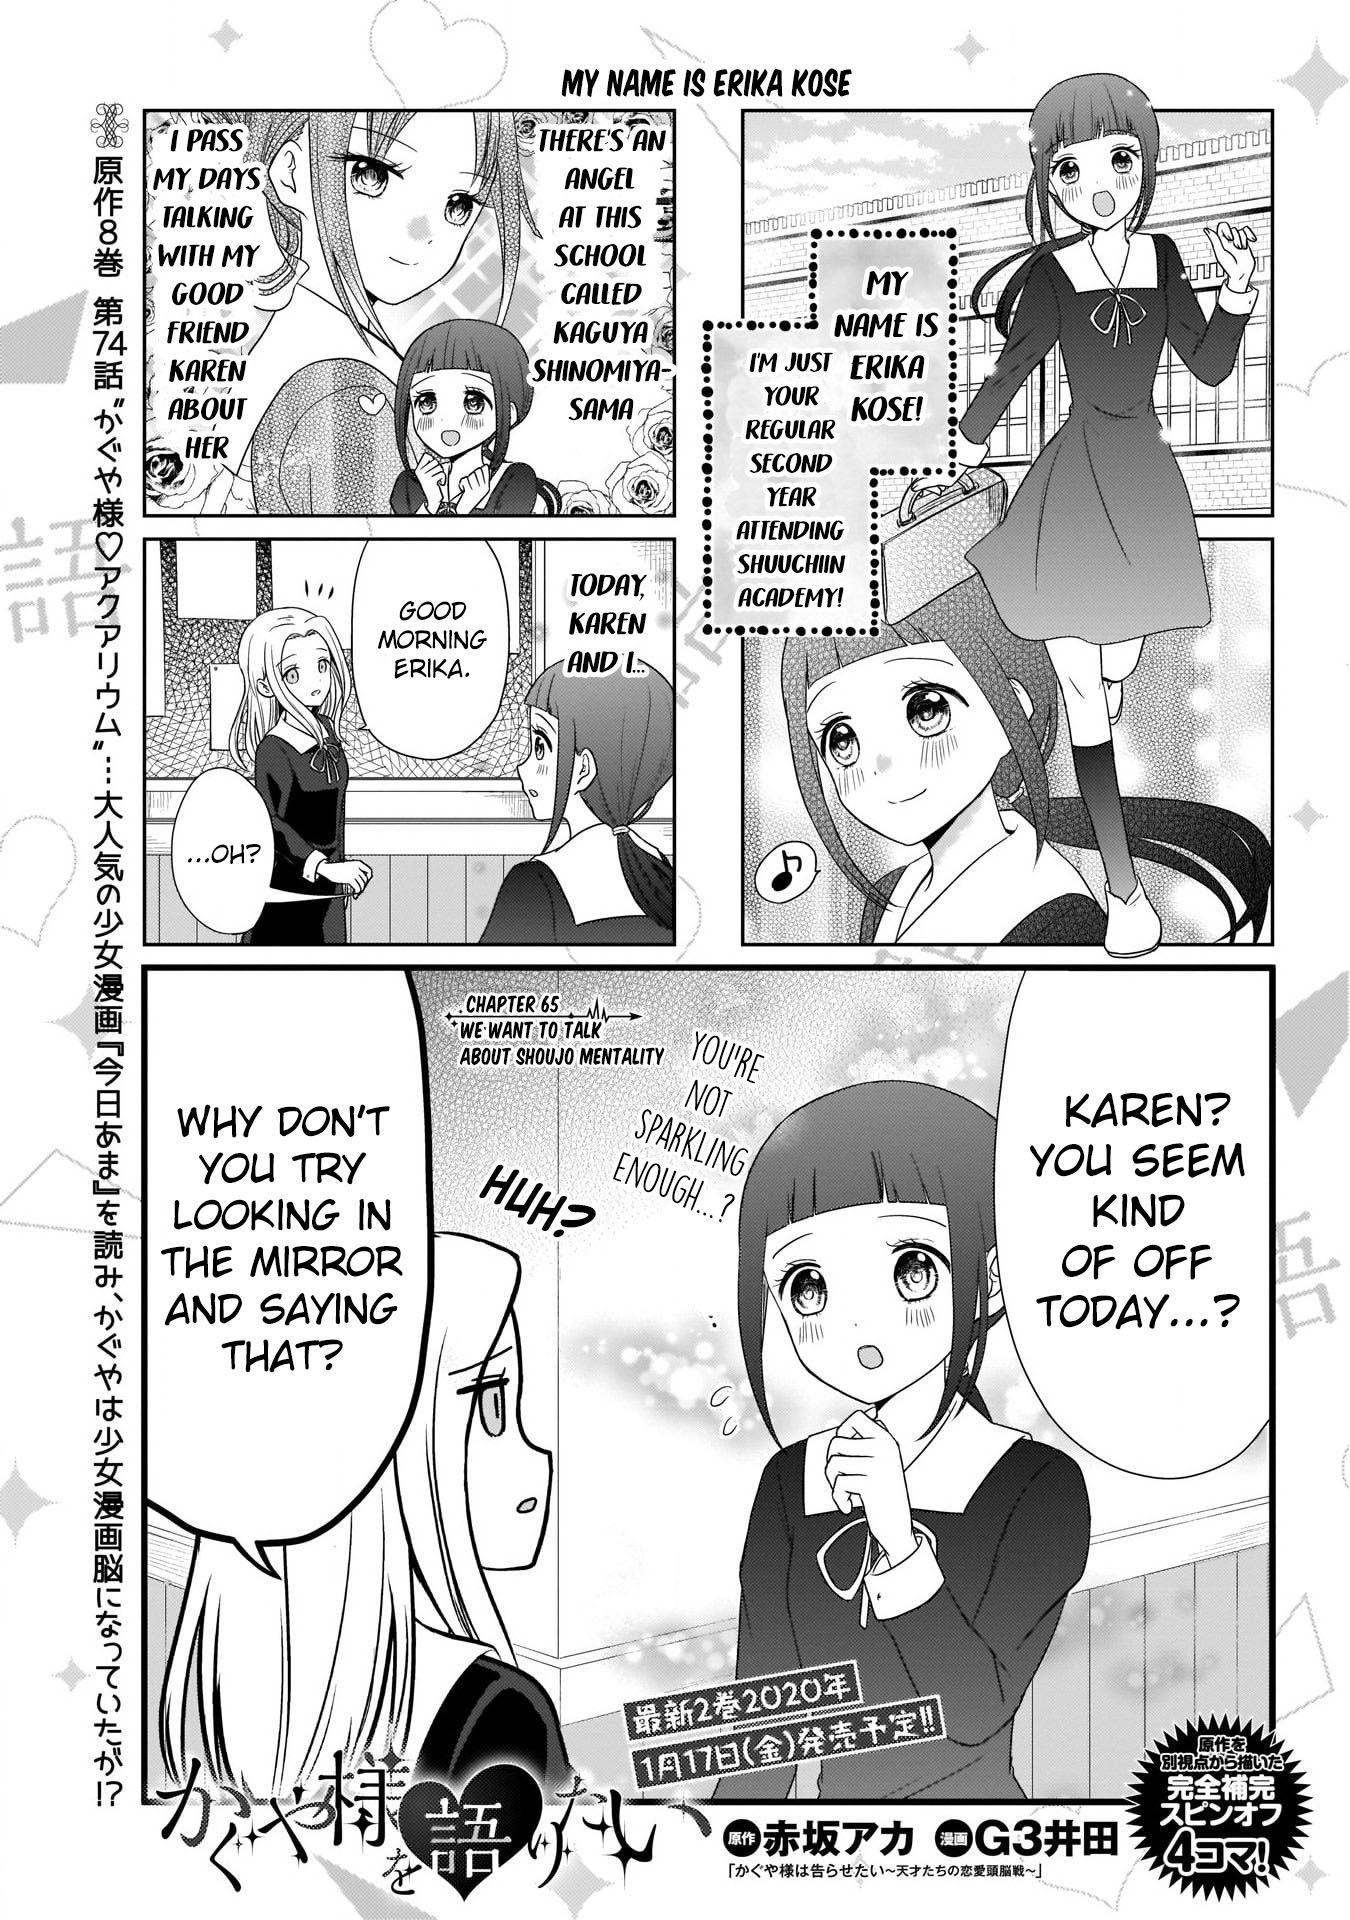 We Want To Talk About Kaguya 65 2